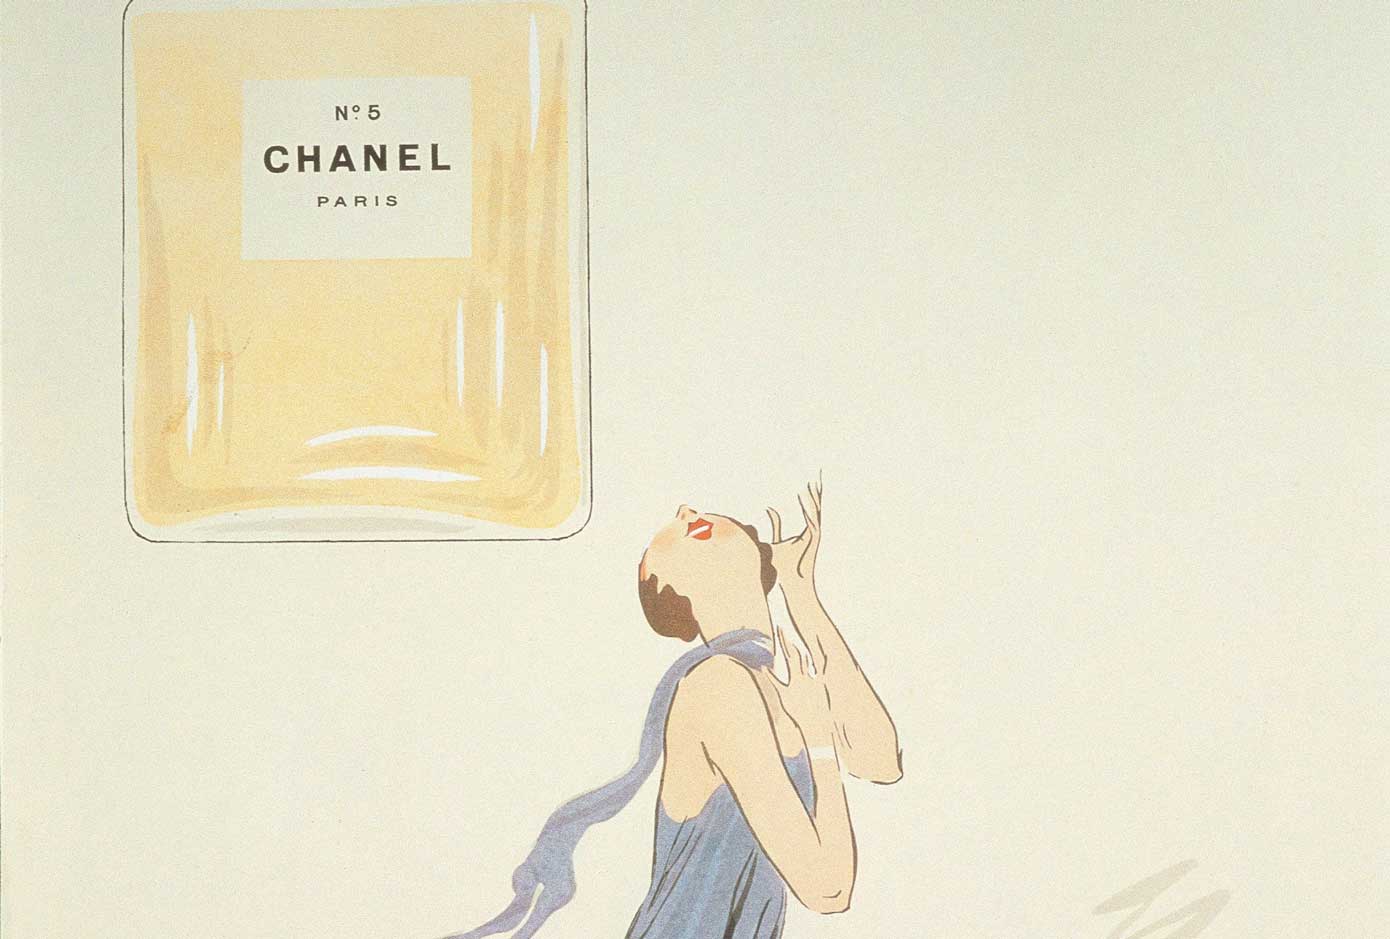 Do You Have a Chanel No5 Story? This Beauty Icon is 100 Years Old